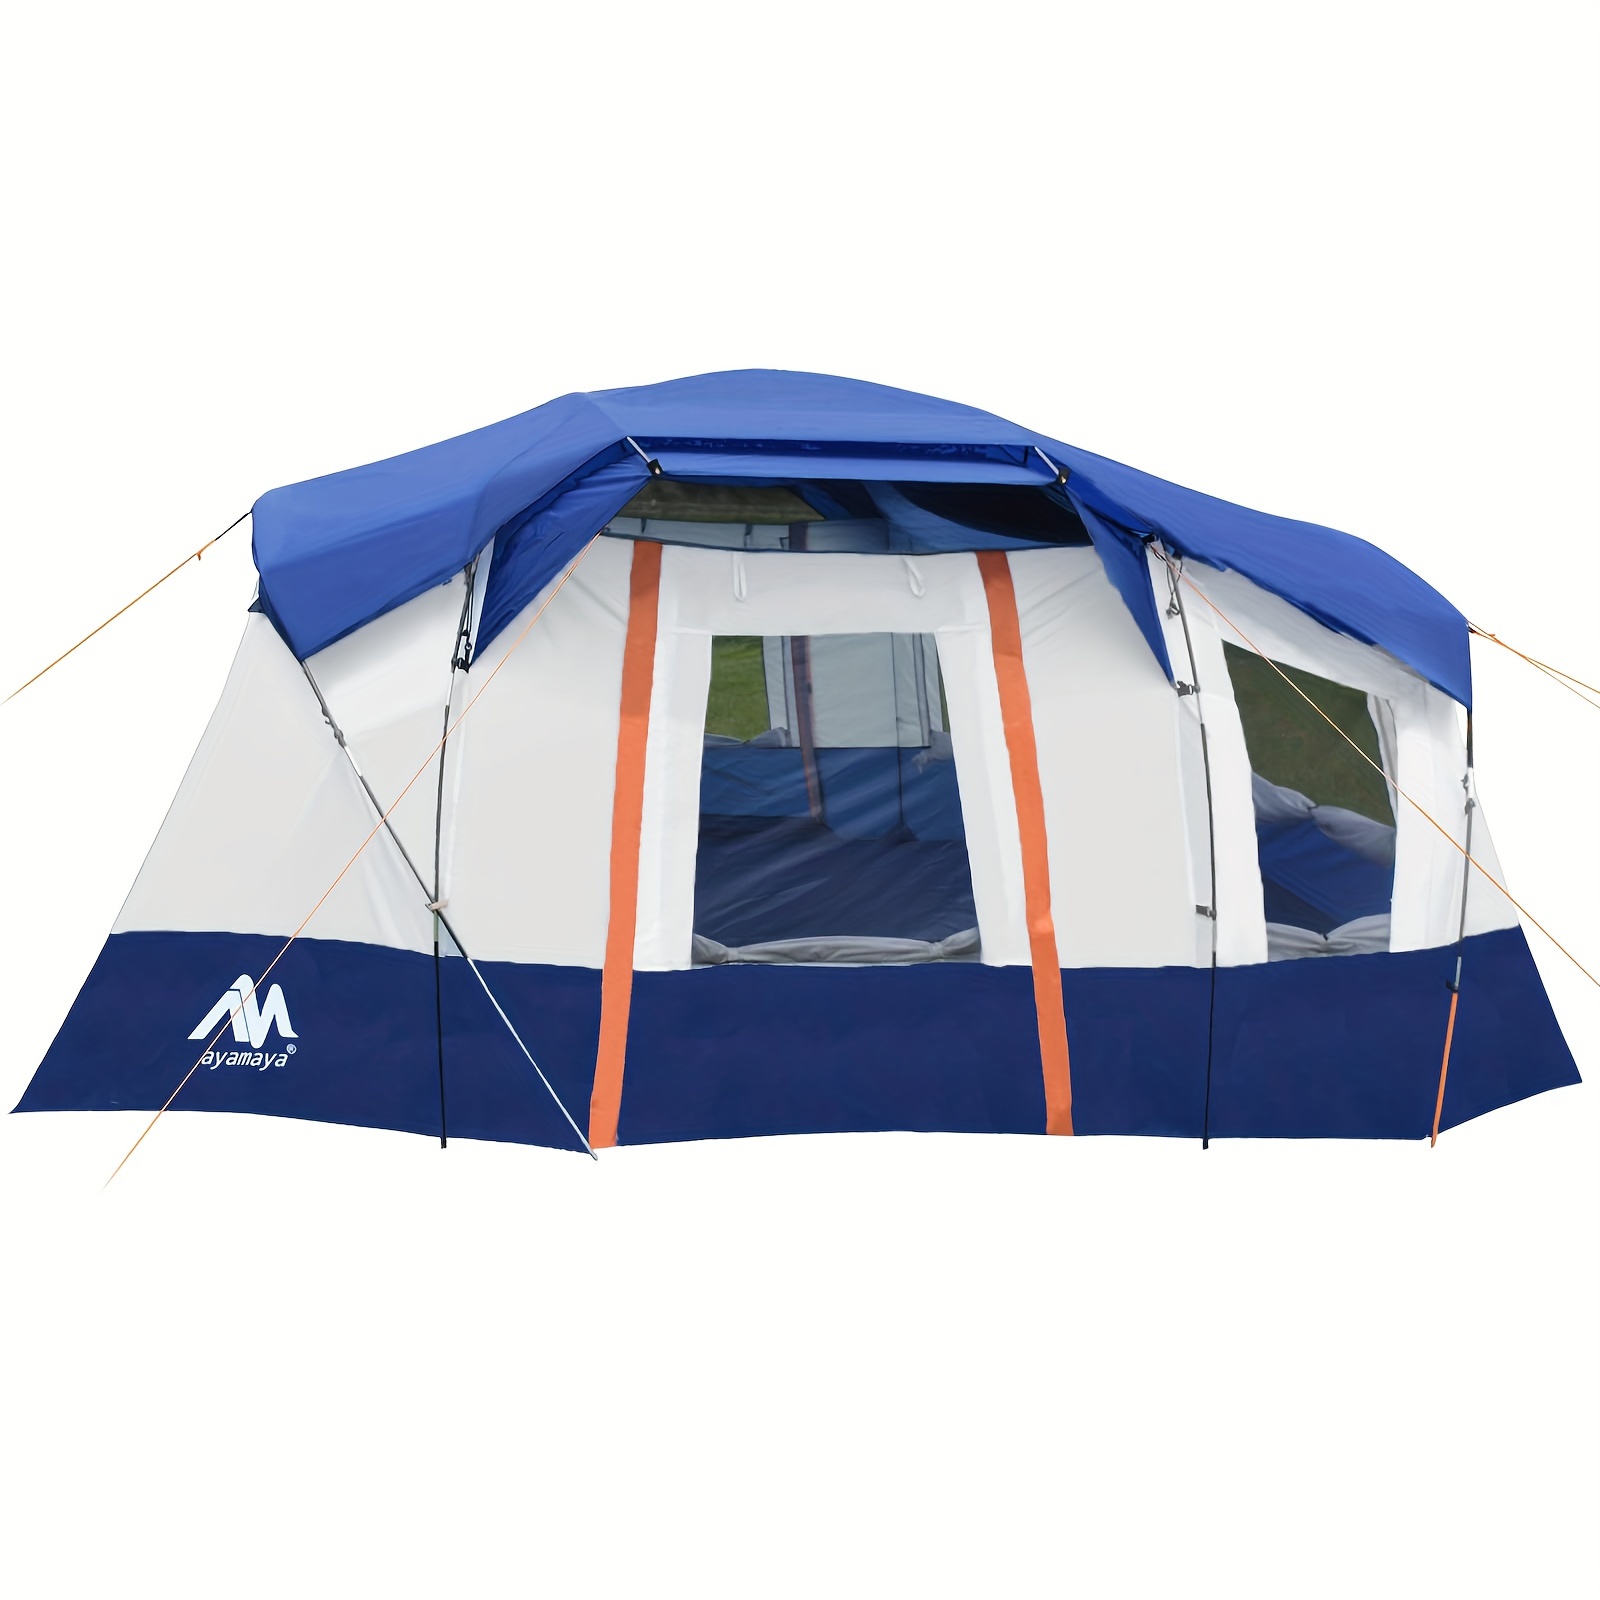 

10 Person Tent - Ayamaya Waterproof Multi Room Large Family Camping Tents With Skylight & Removable Rainfly, Portable Huge Cabin Tent 2 Doors With Porch, 4 Mesh Windows, Projection Screen For Camping